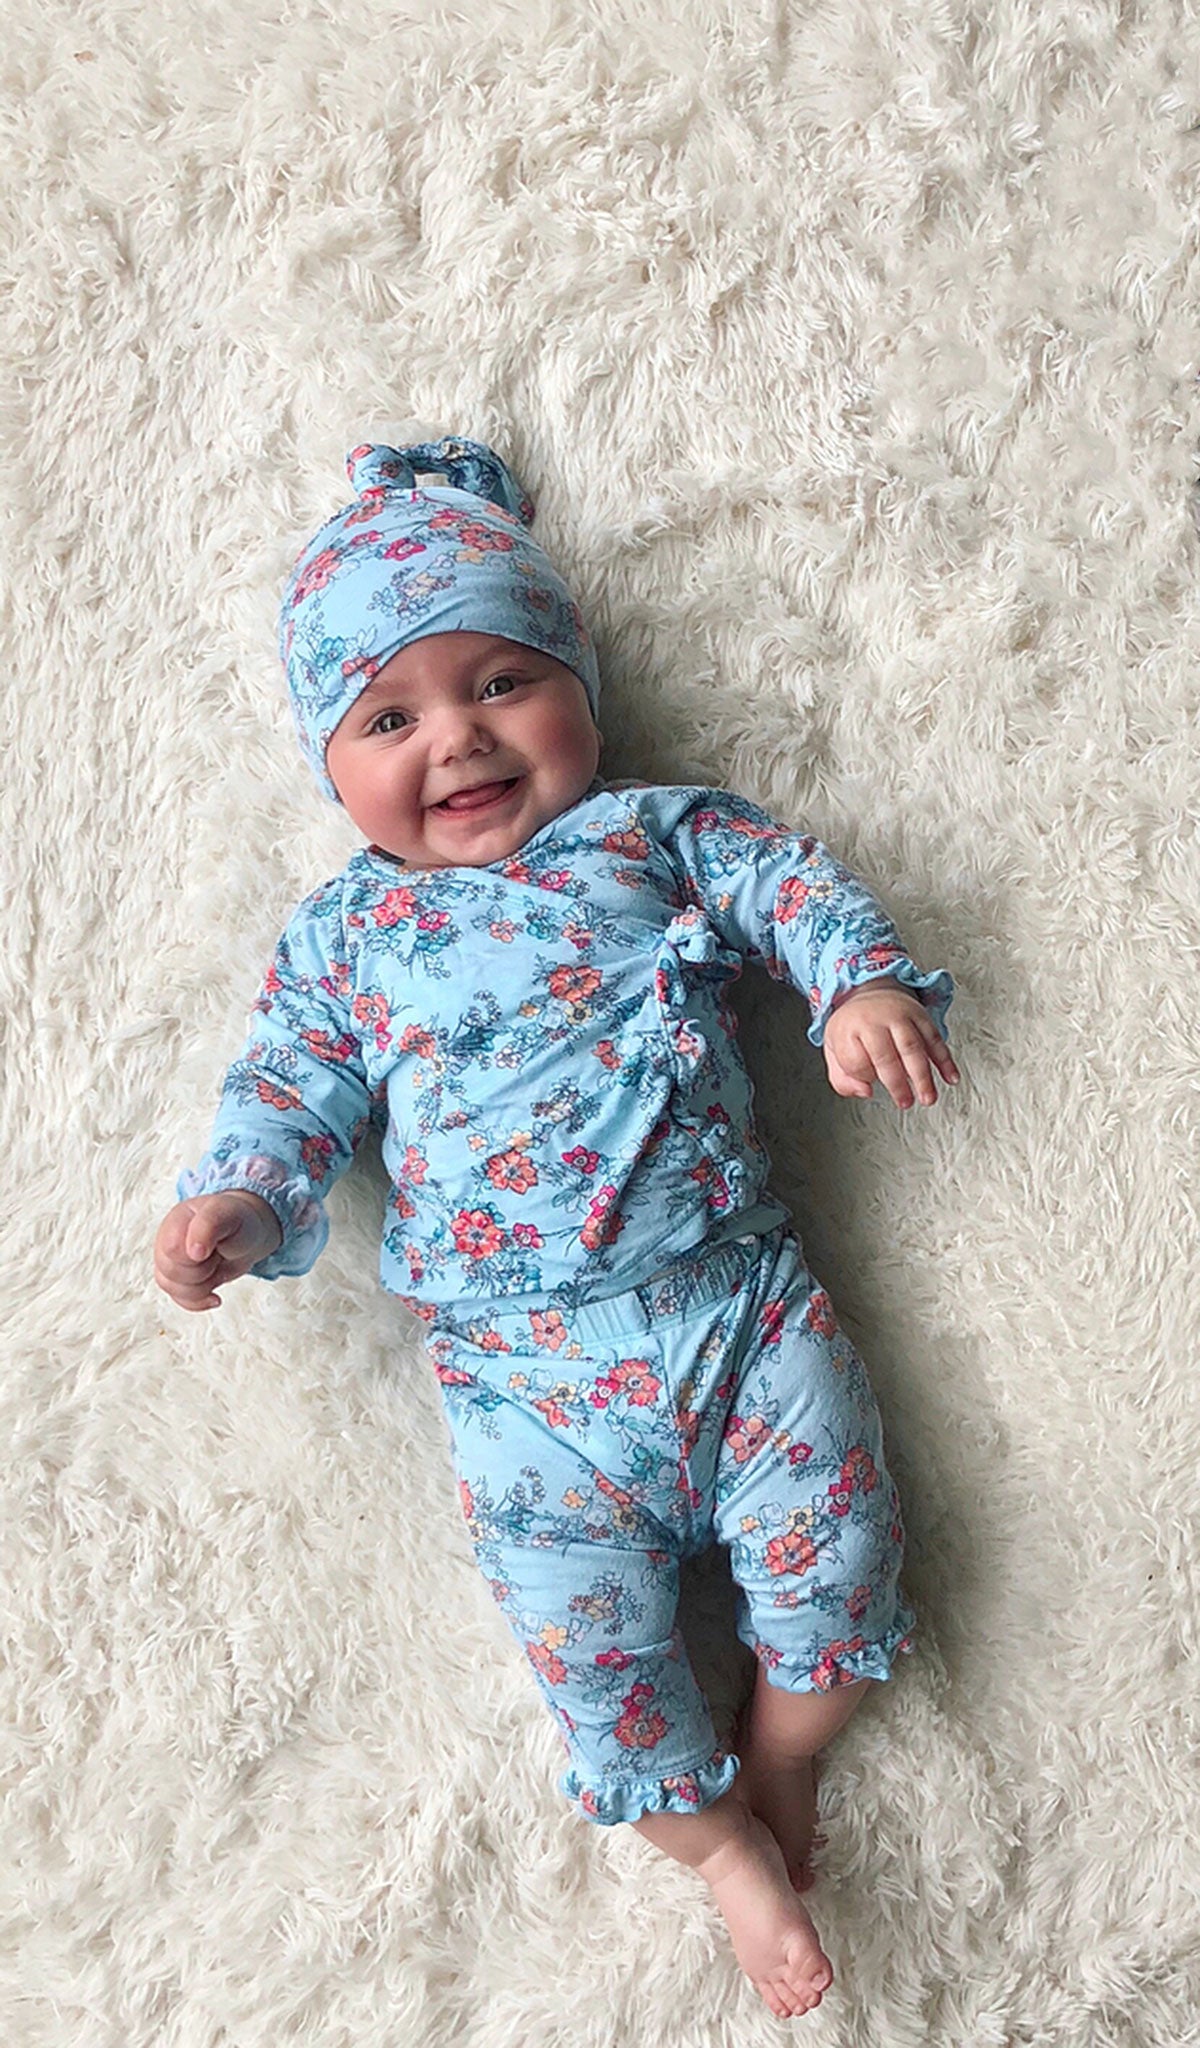 Azure Mist Baby's Ruffle Take-Me-Home 3 Piece set worn by baby girl laying on her back and smiling.